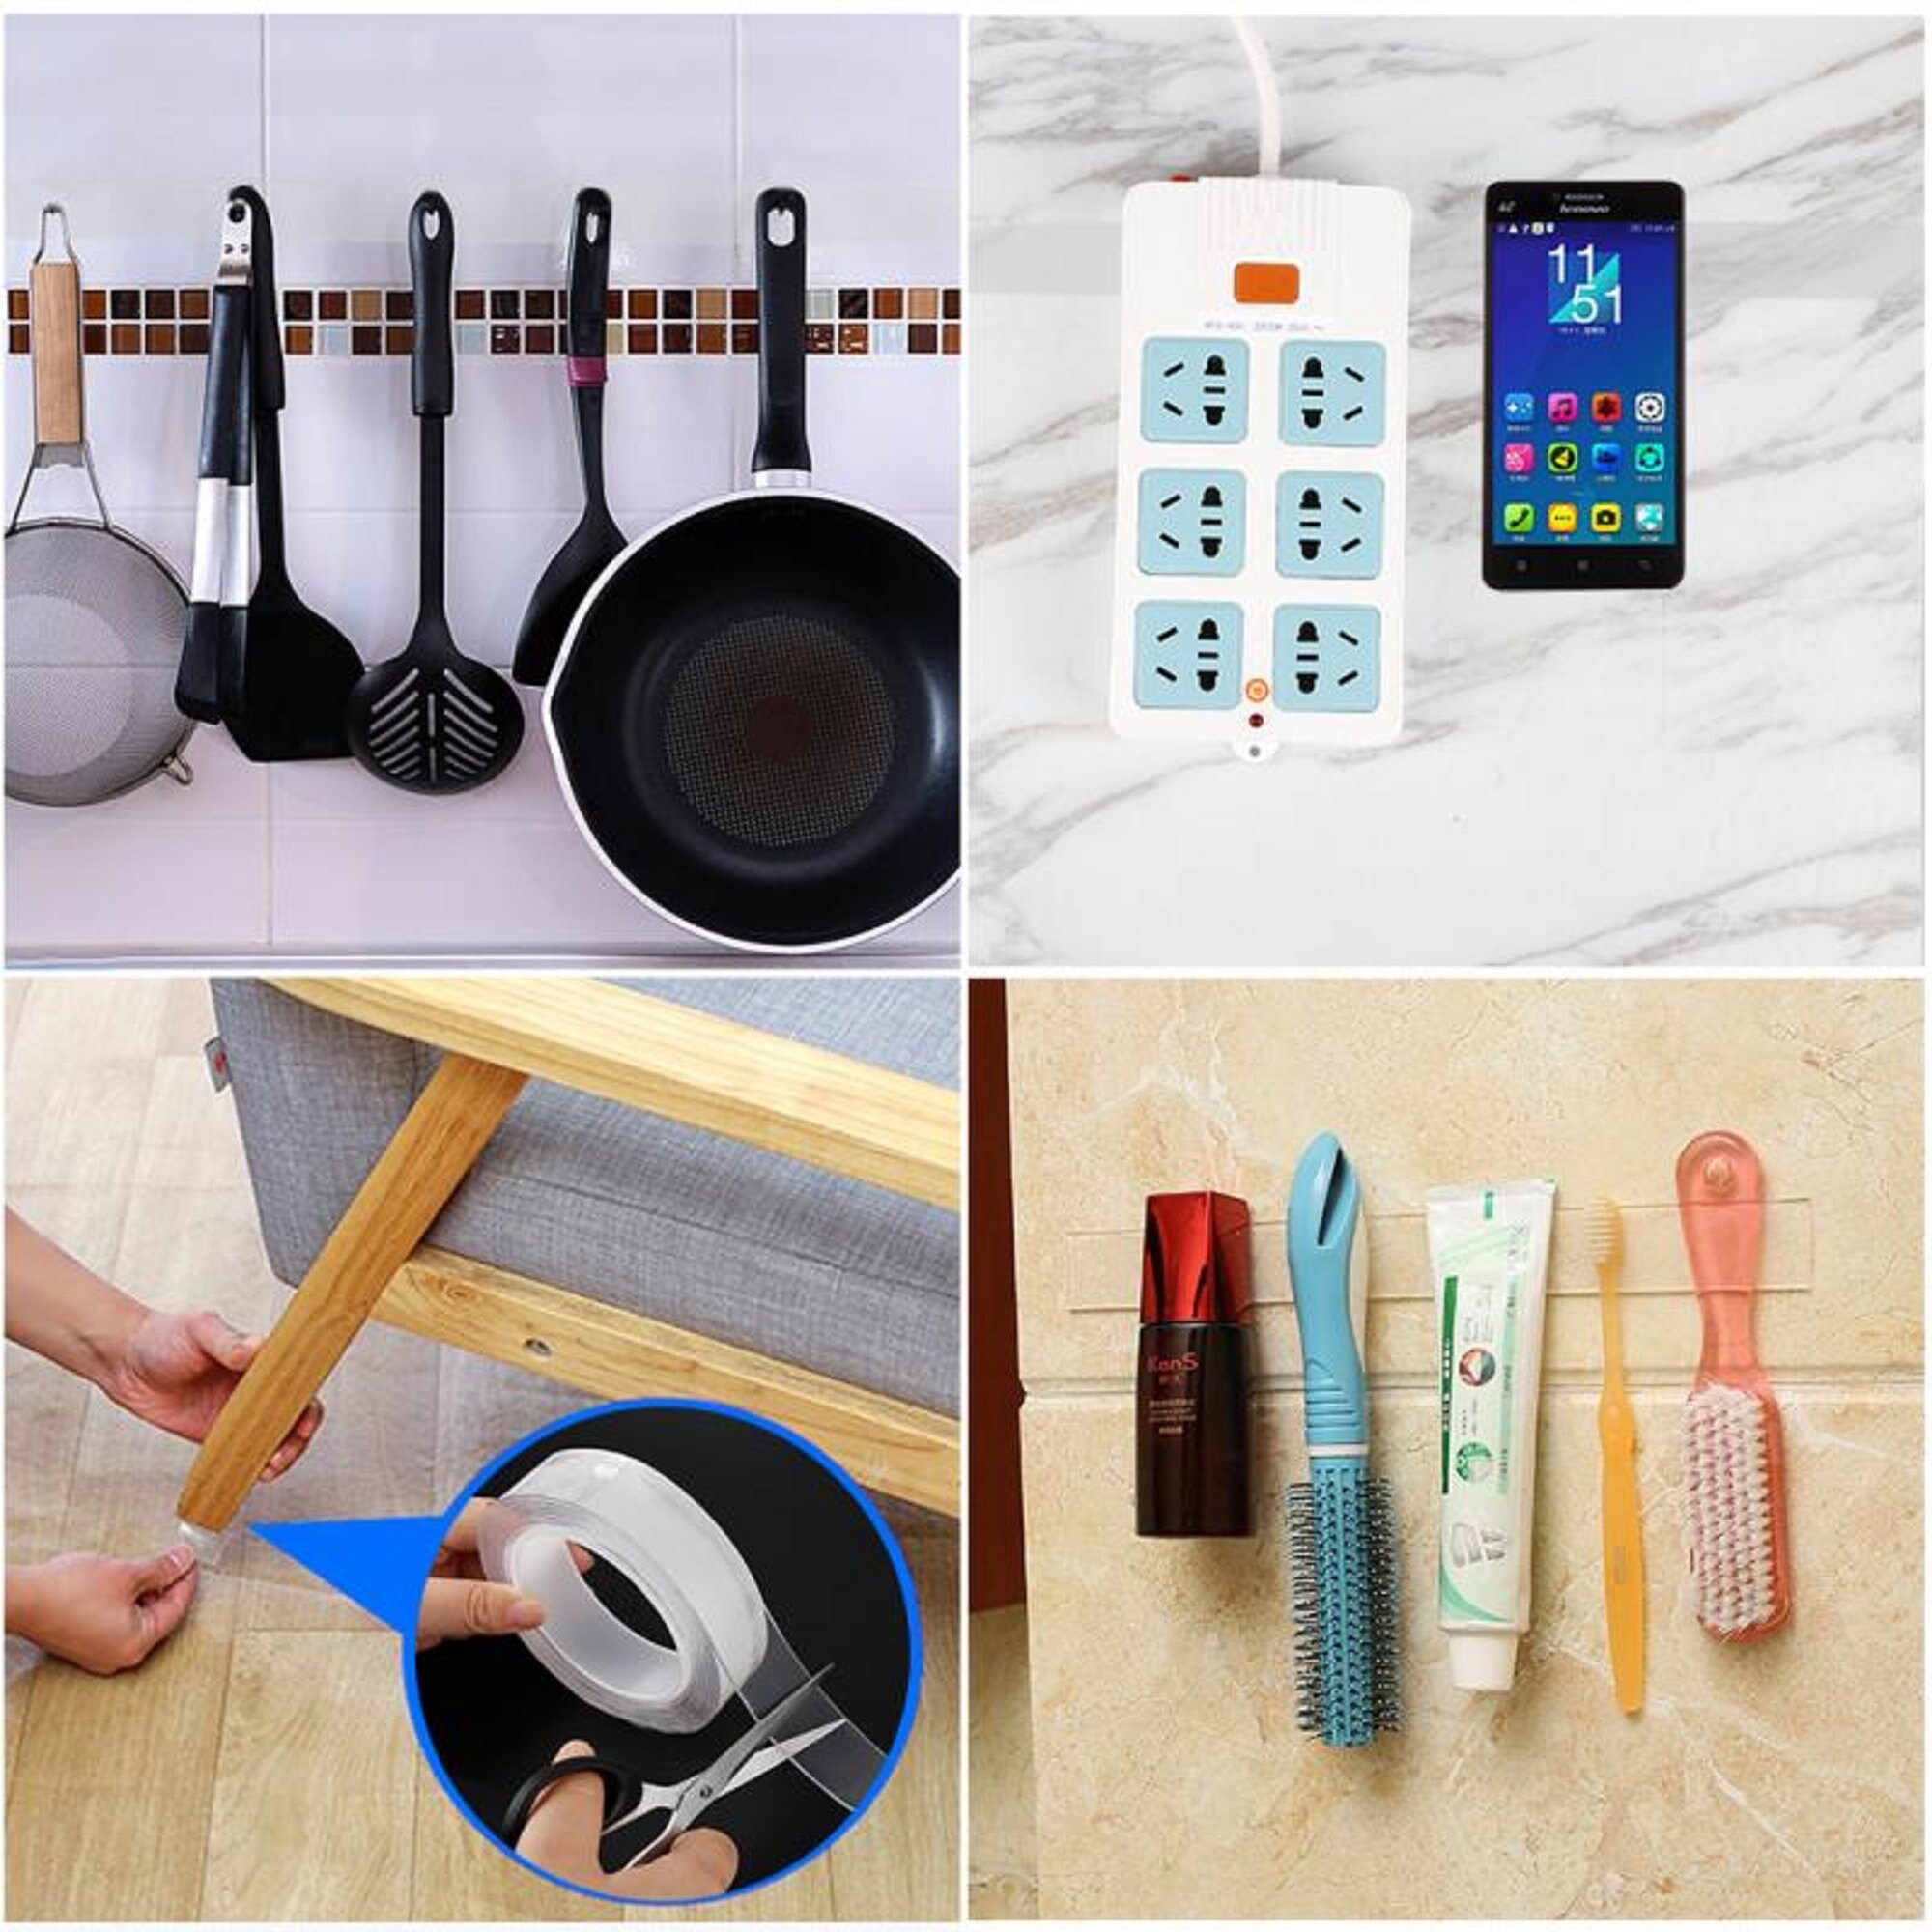 1/2/3/5M Super Strong Tape Photo Picture Frame Hooks On The Wall Hangers  Adhesive Double Sided Nano tape Stickers WaterProof